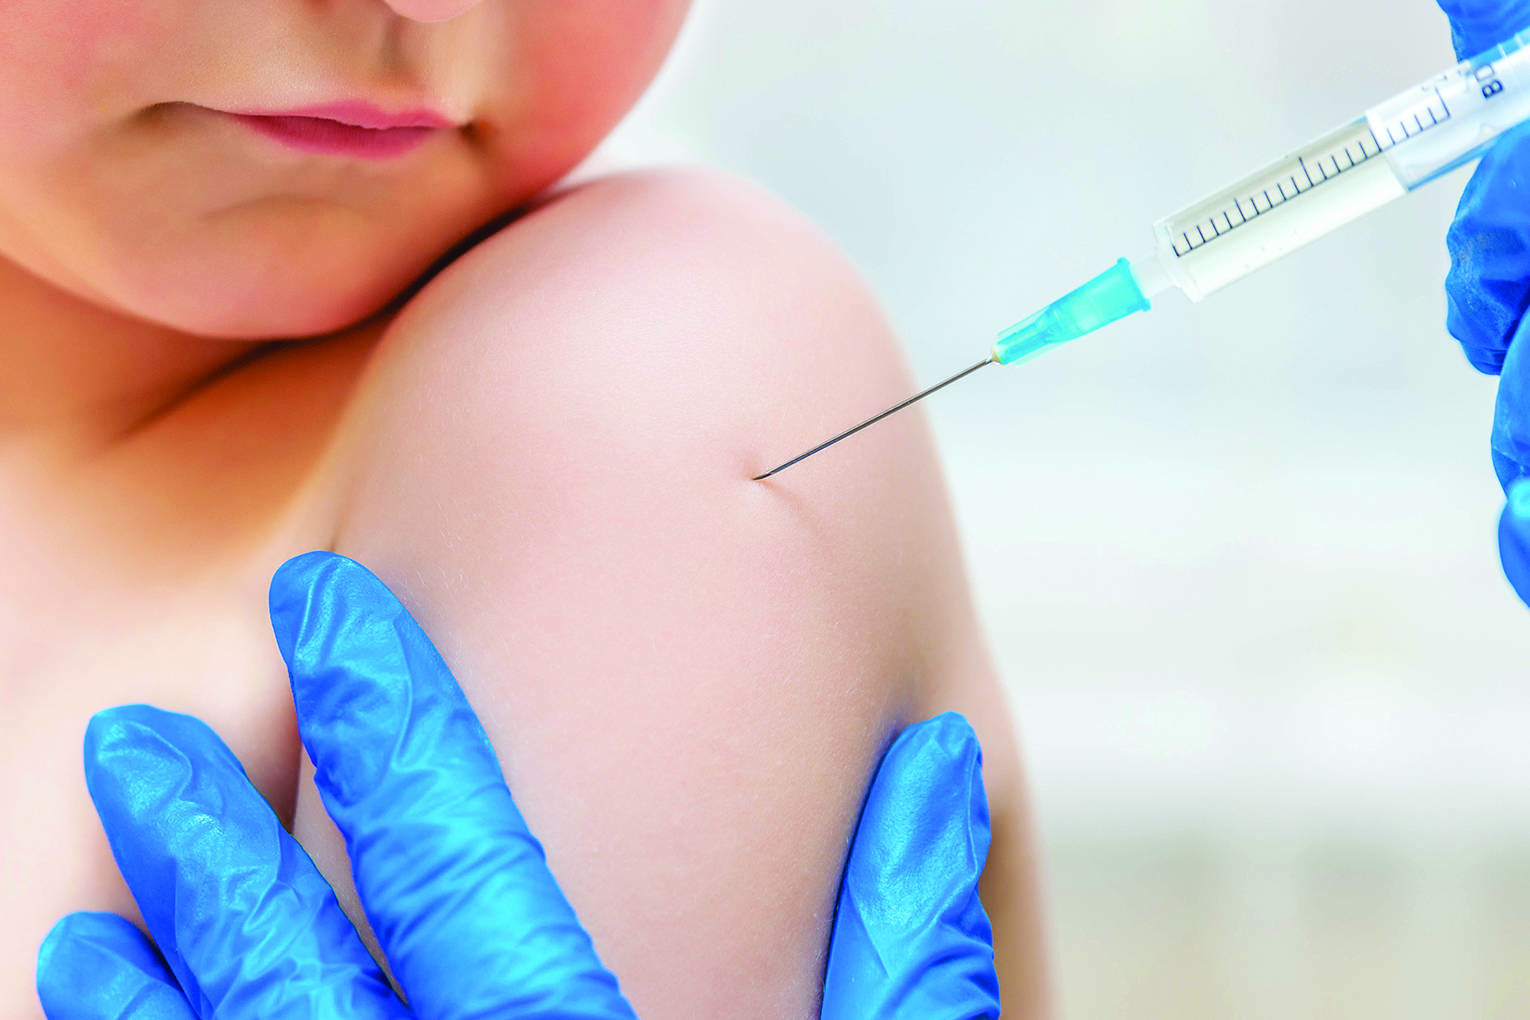 In May, Governor Jay Inslee signed EHB 1638, a bill updating Washington state’s school and child care immunization requirements to remove the personal and philosophical exemption option for the MMR vaccine.